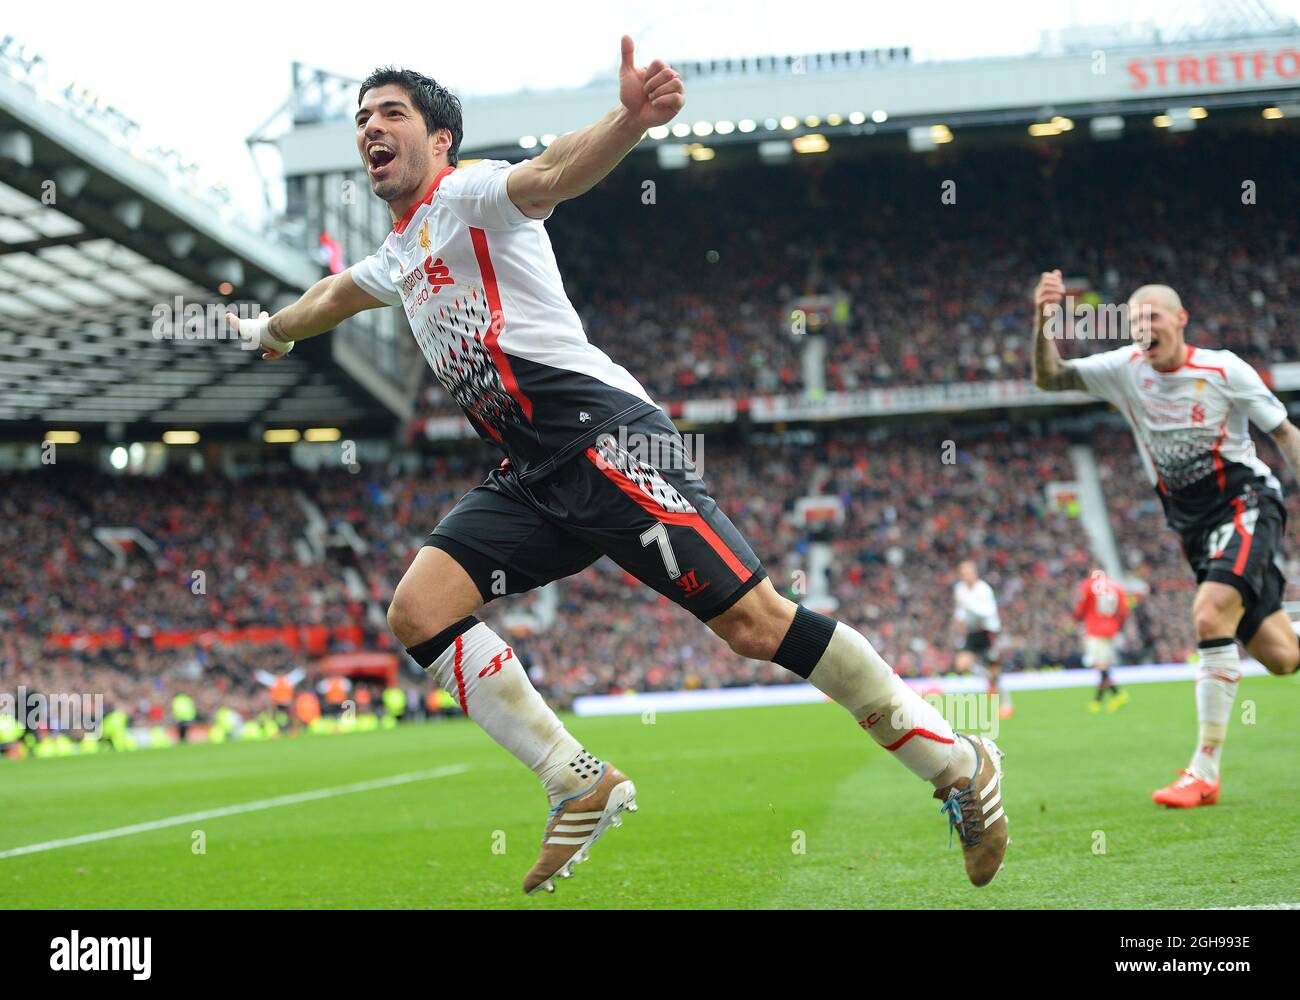 Luis Suarez of Liverpool celebrates scoring the third goal during the Barclays Premier League match between Manchester United and Liverpool held at the Old Trafford Stadium in Manchester, England on March 16, 2014. Pic Simon Bellis Stock Photo